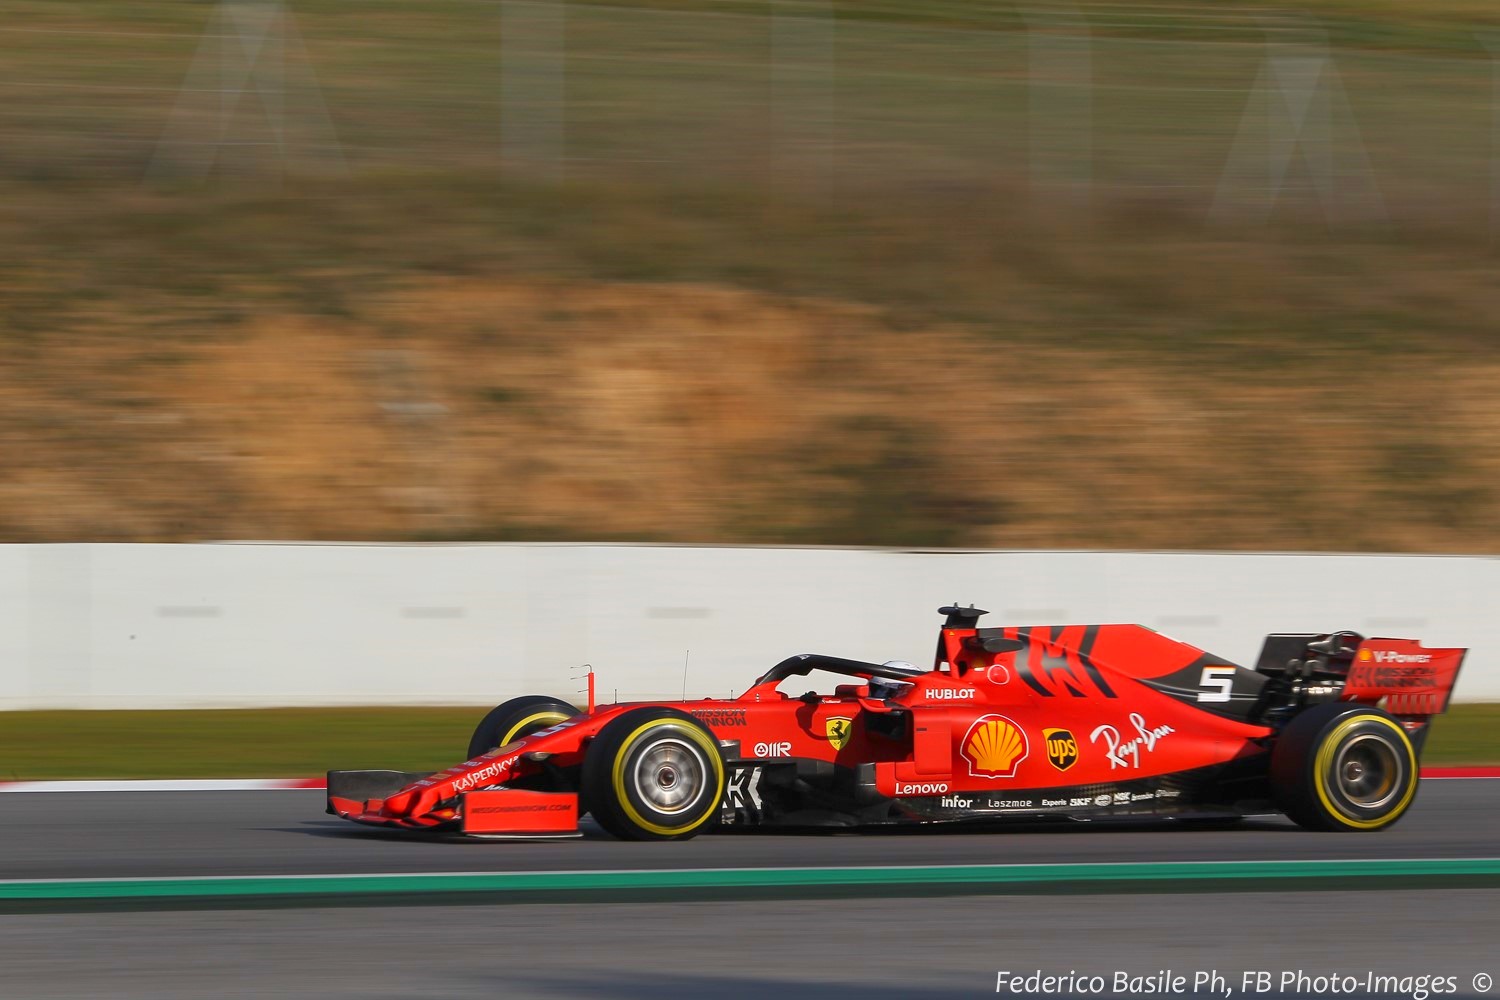 How can Wolff say the Ferrari is 1/2-sec ahead when they have their engine turned way down?